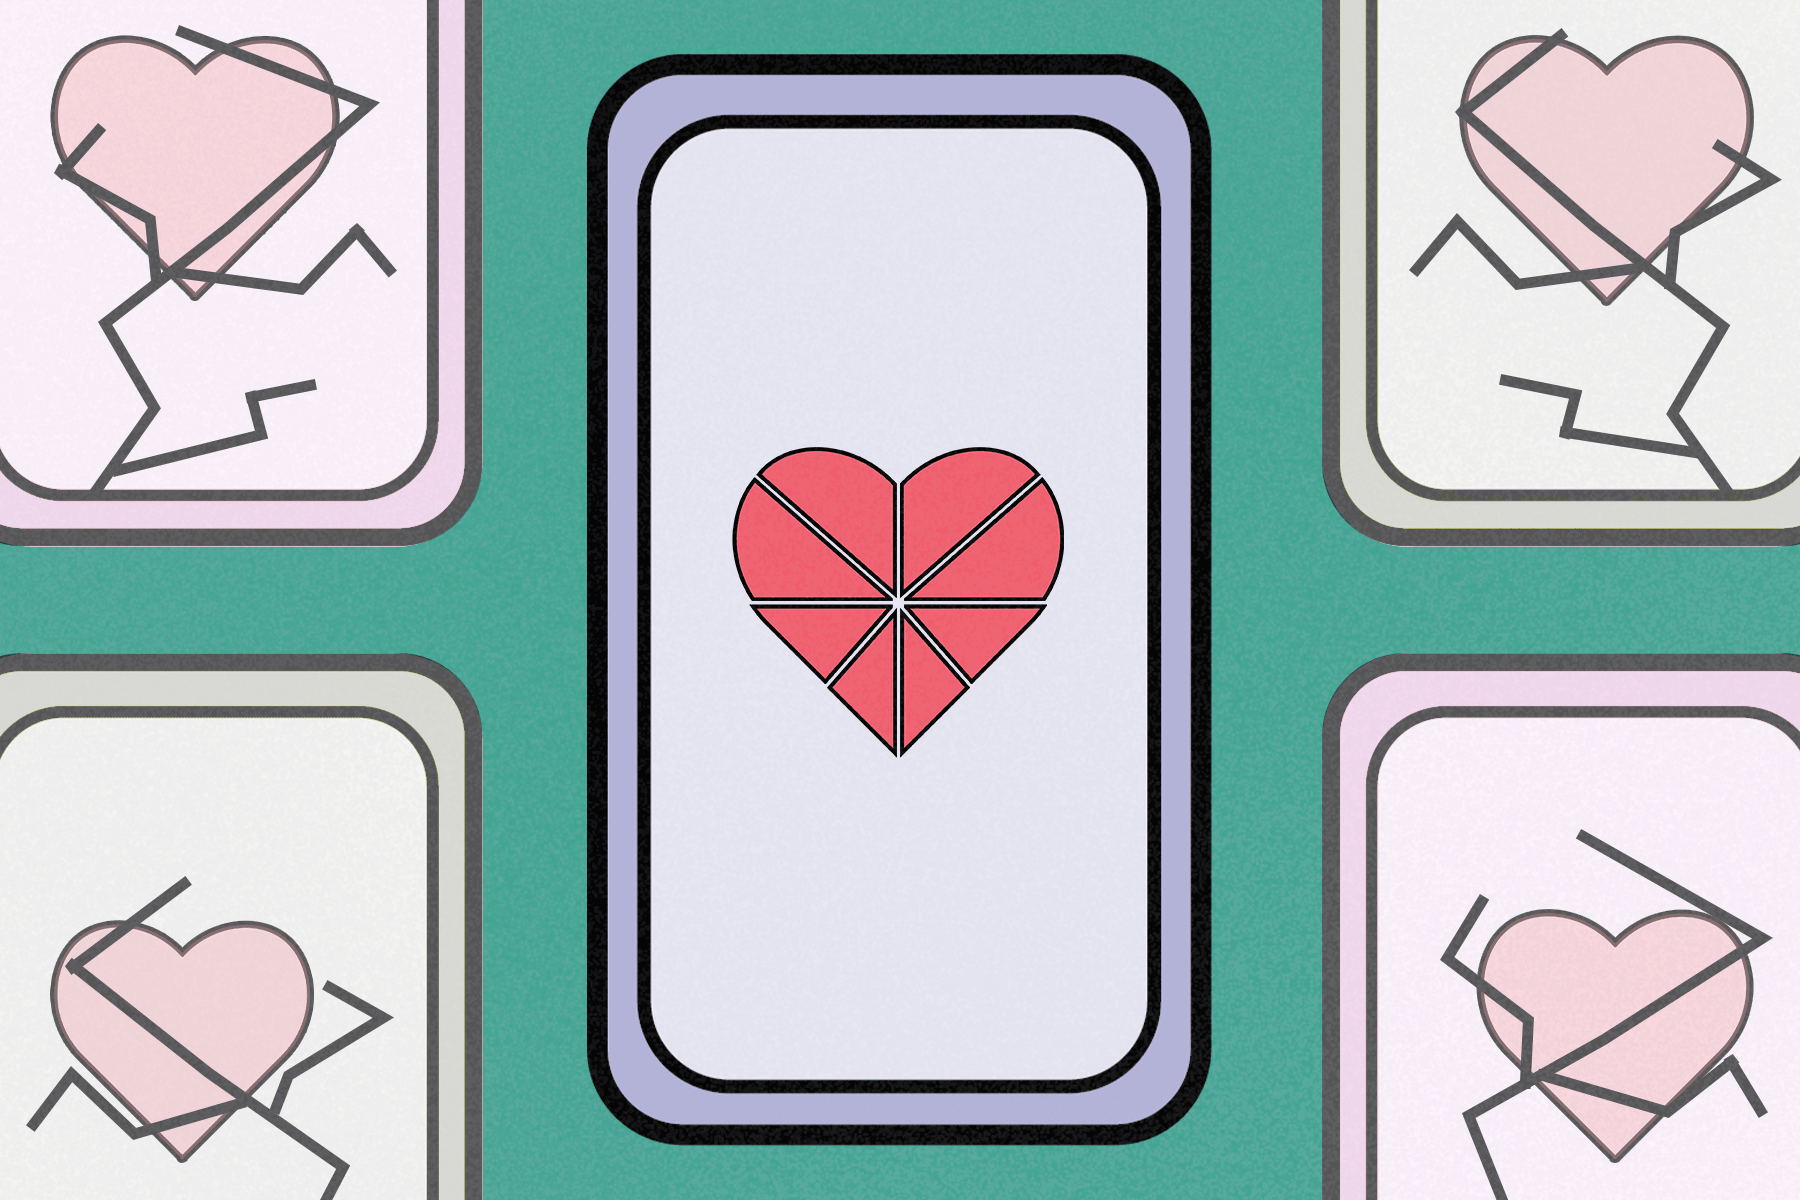 An illustration of phone screens, one in the center with a loading heart and others with cracked screens over hearts.